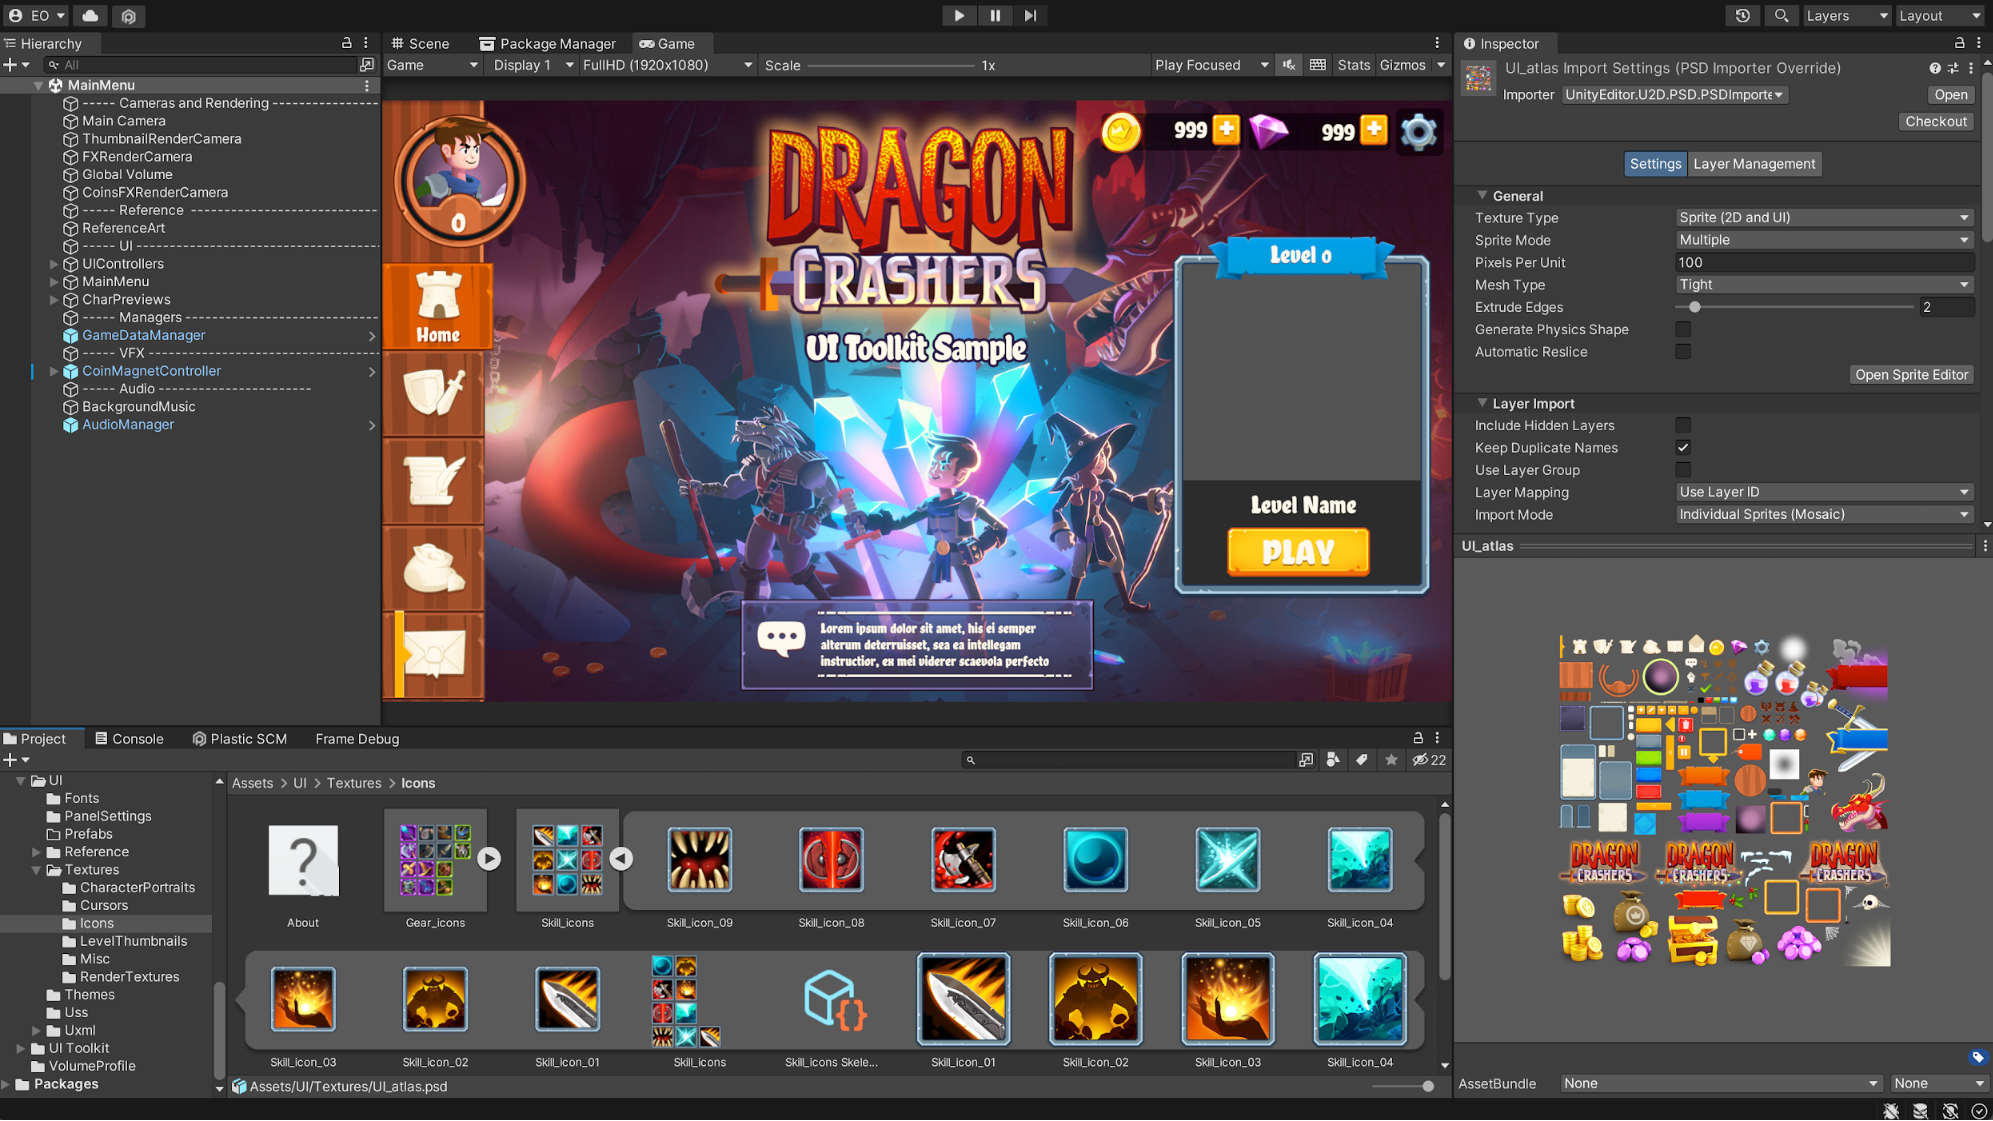 A PSD file containing the icons shown in Project view unfolds all the sprites from within the file that can be used as 2D sprites in any other Unity system.